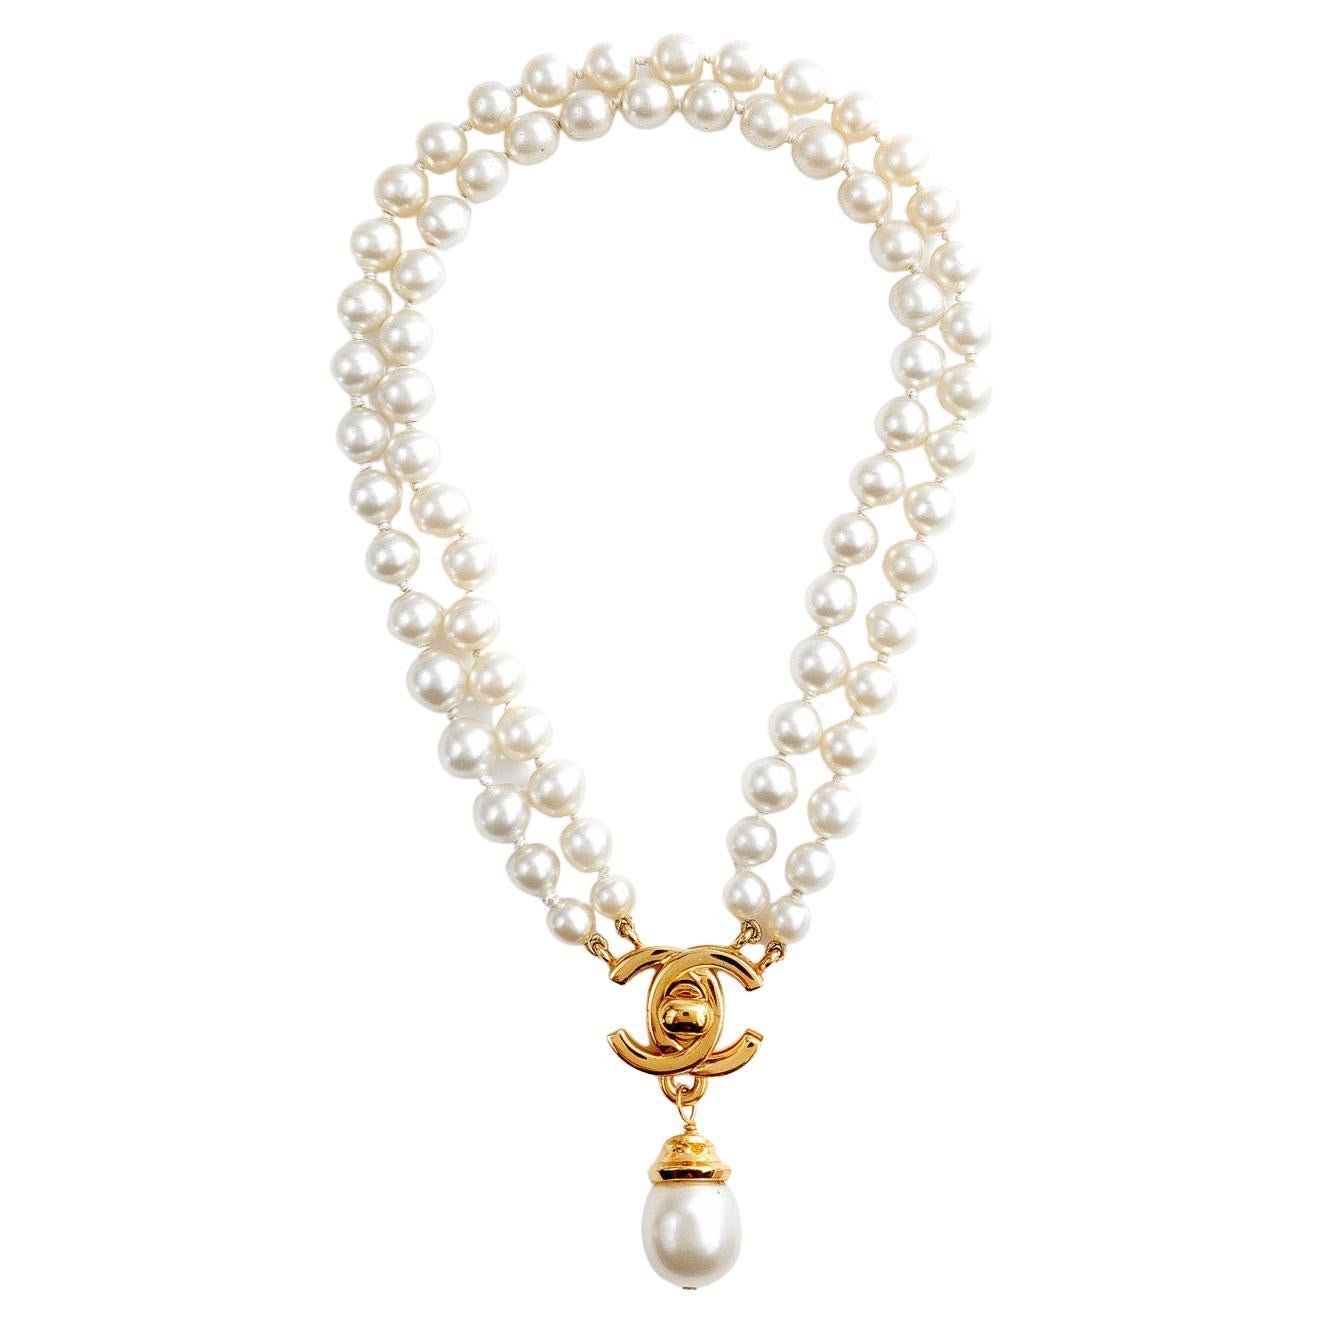 Auth Vintage Chanel 1981 Classic Long Strand Of Pearls Necklace 64”